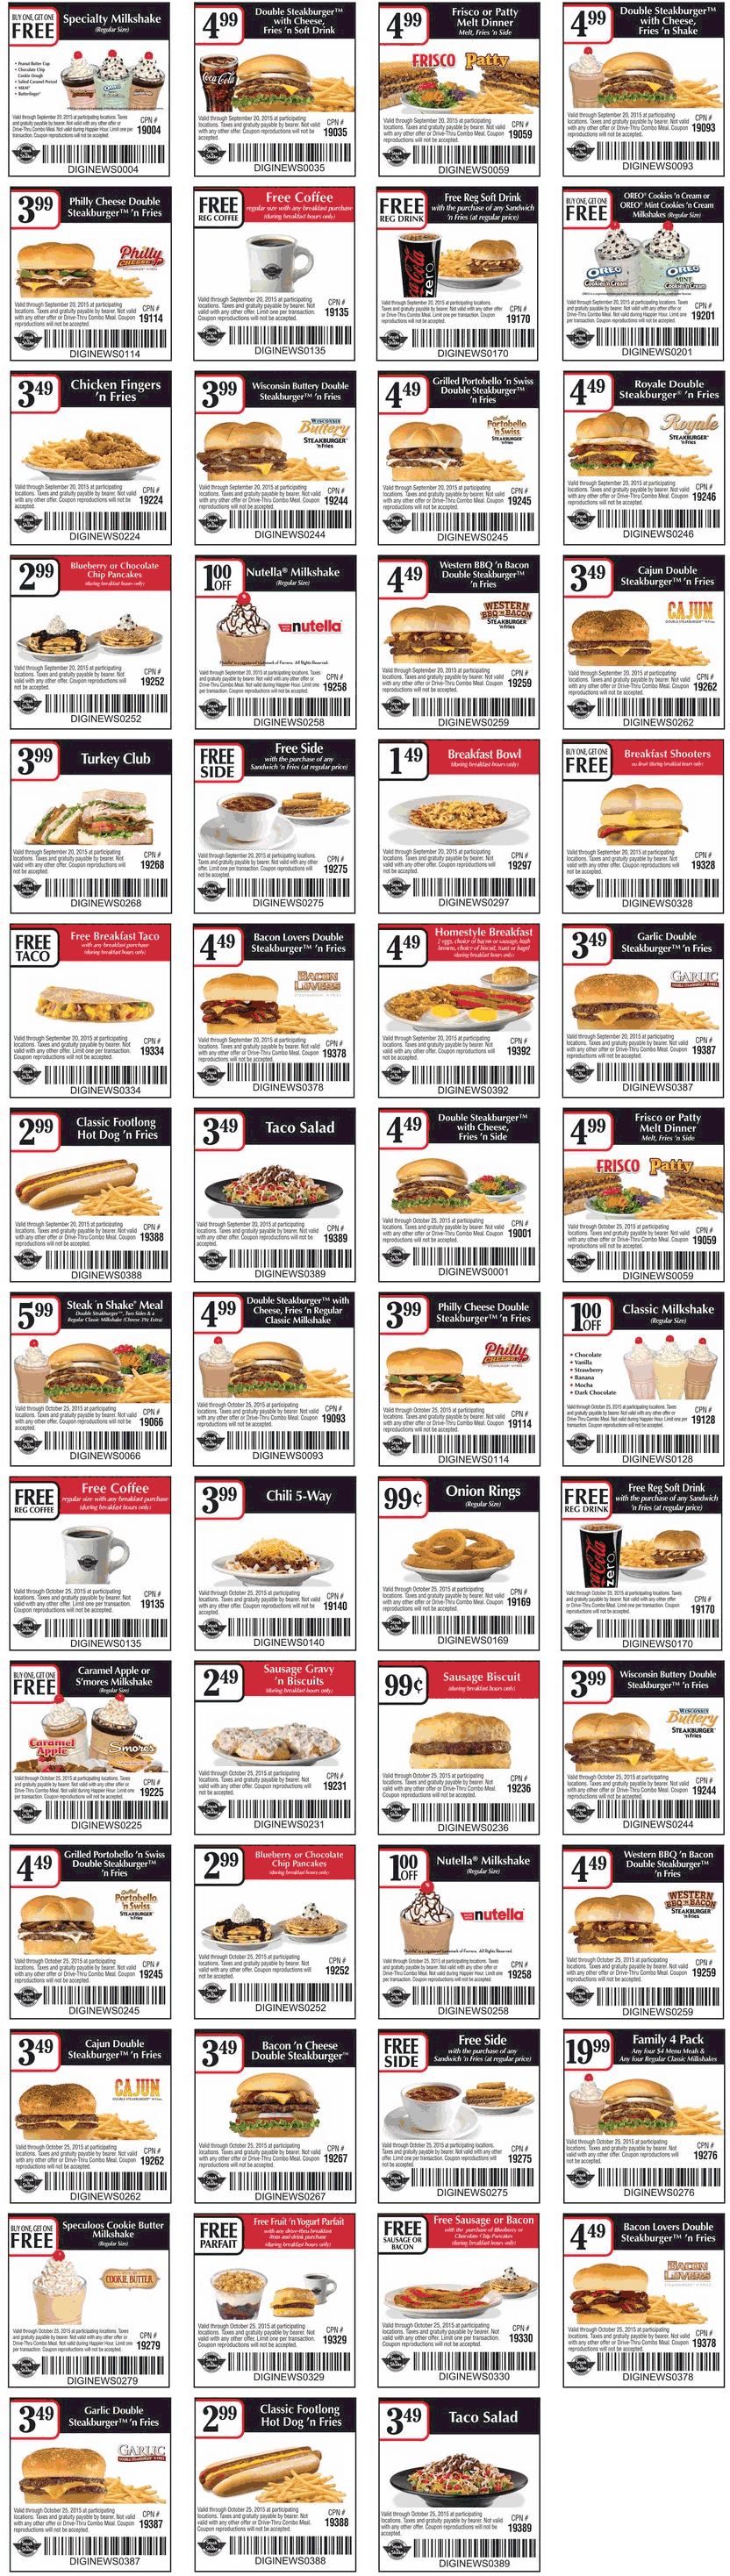 steak-n-shake-july-2020-coupons-and-promo-codes